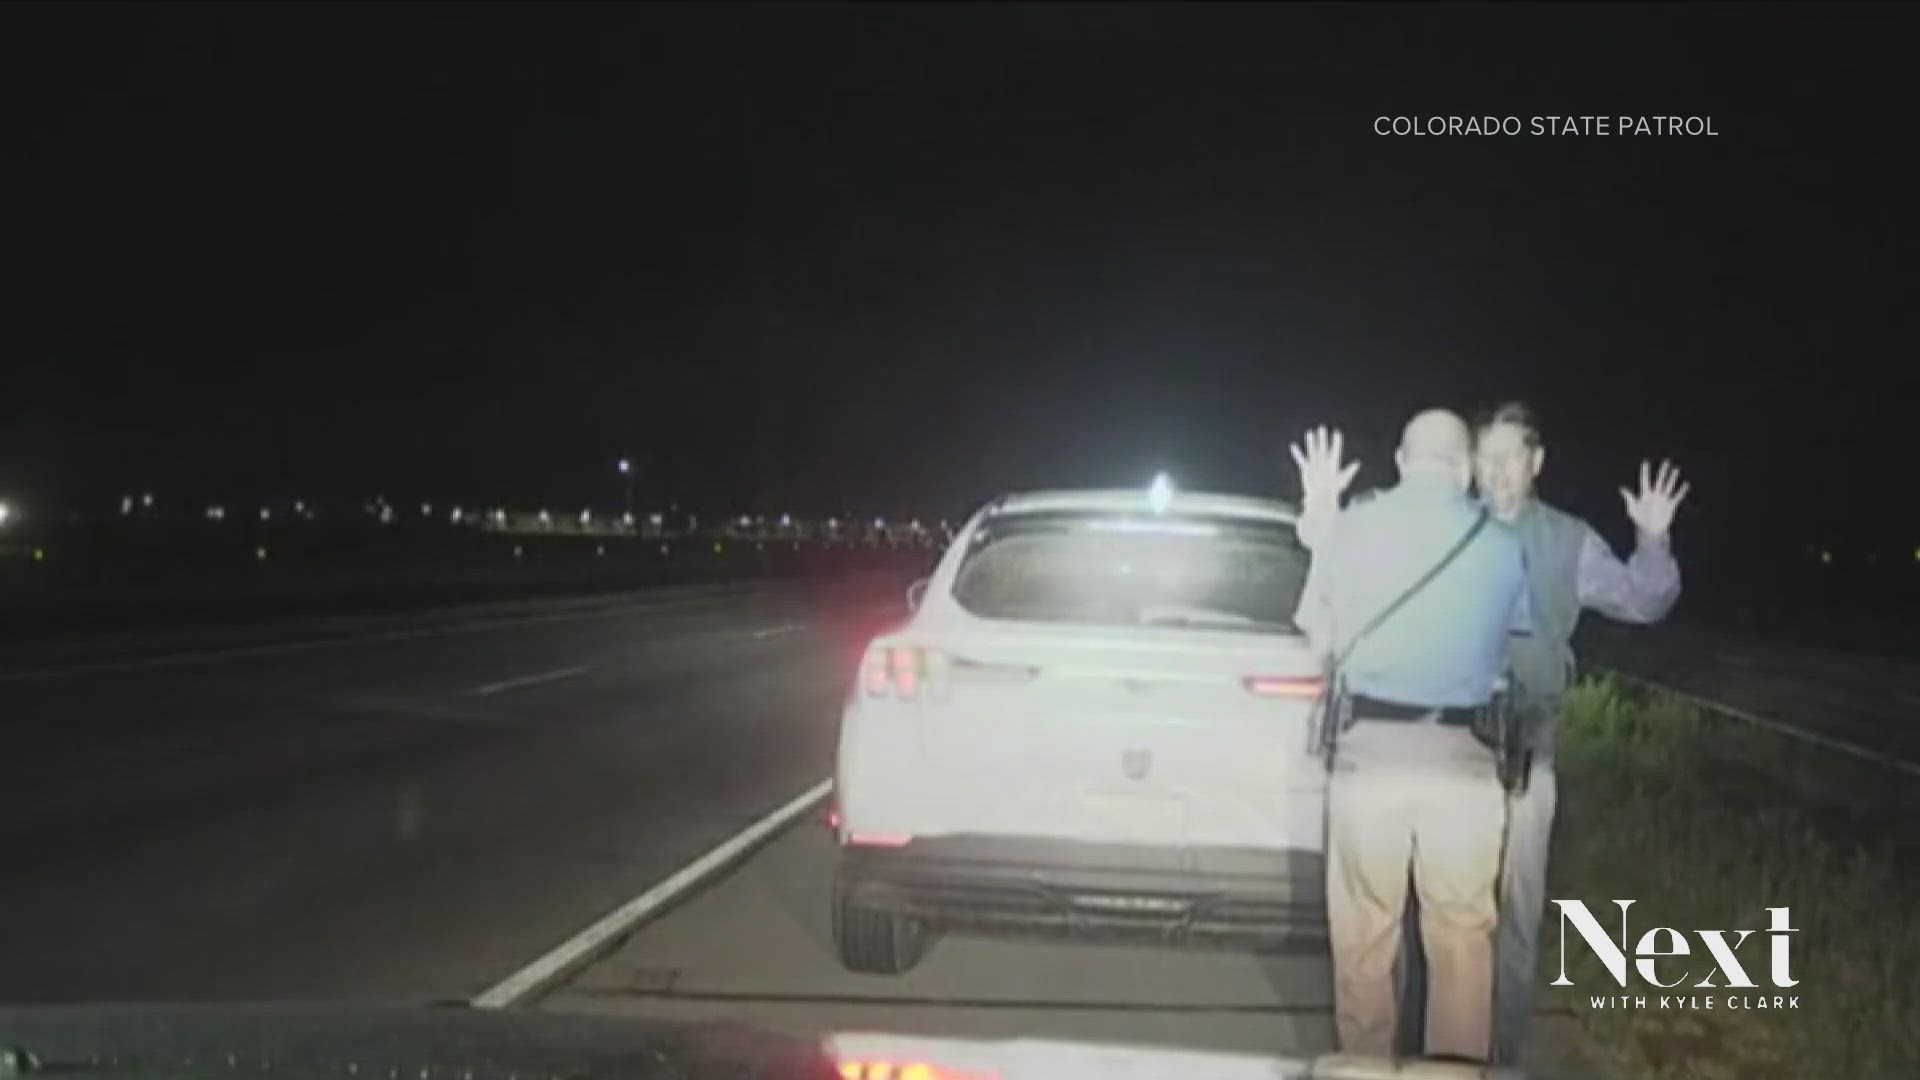 9NEWS obtained dashcam and in-vehicle footage of State House Minority Leader Mike Lynch's arrest from Colorado State Patrol through an open records request.